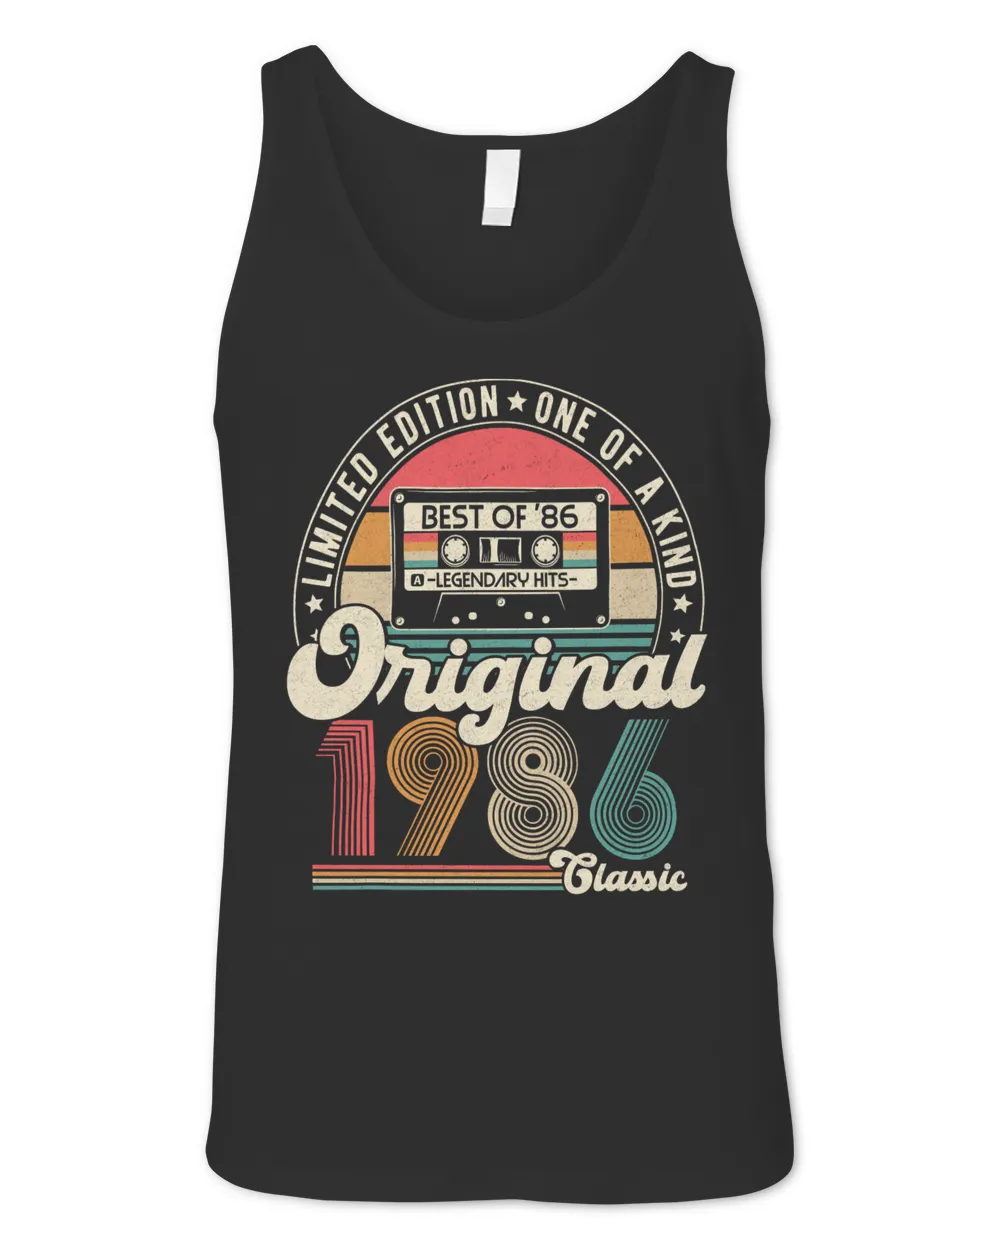 1986 - One of a kind